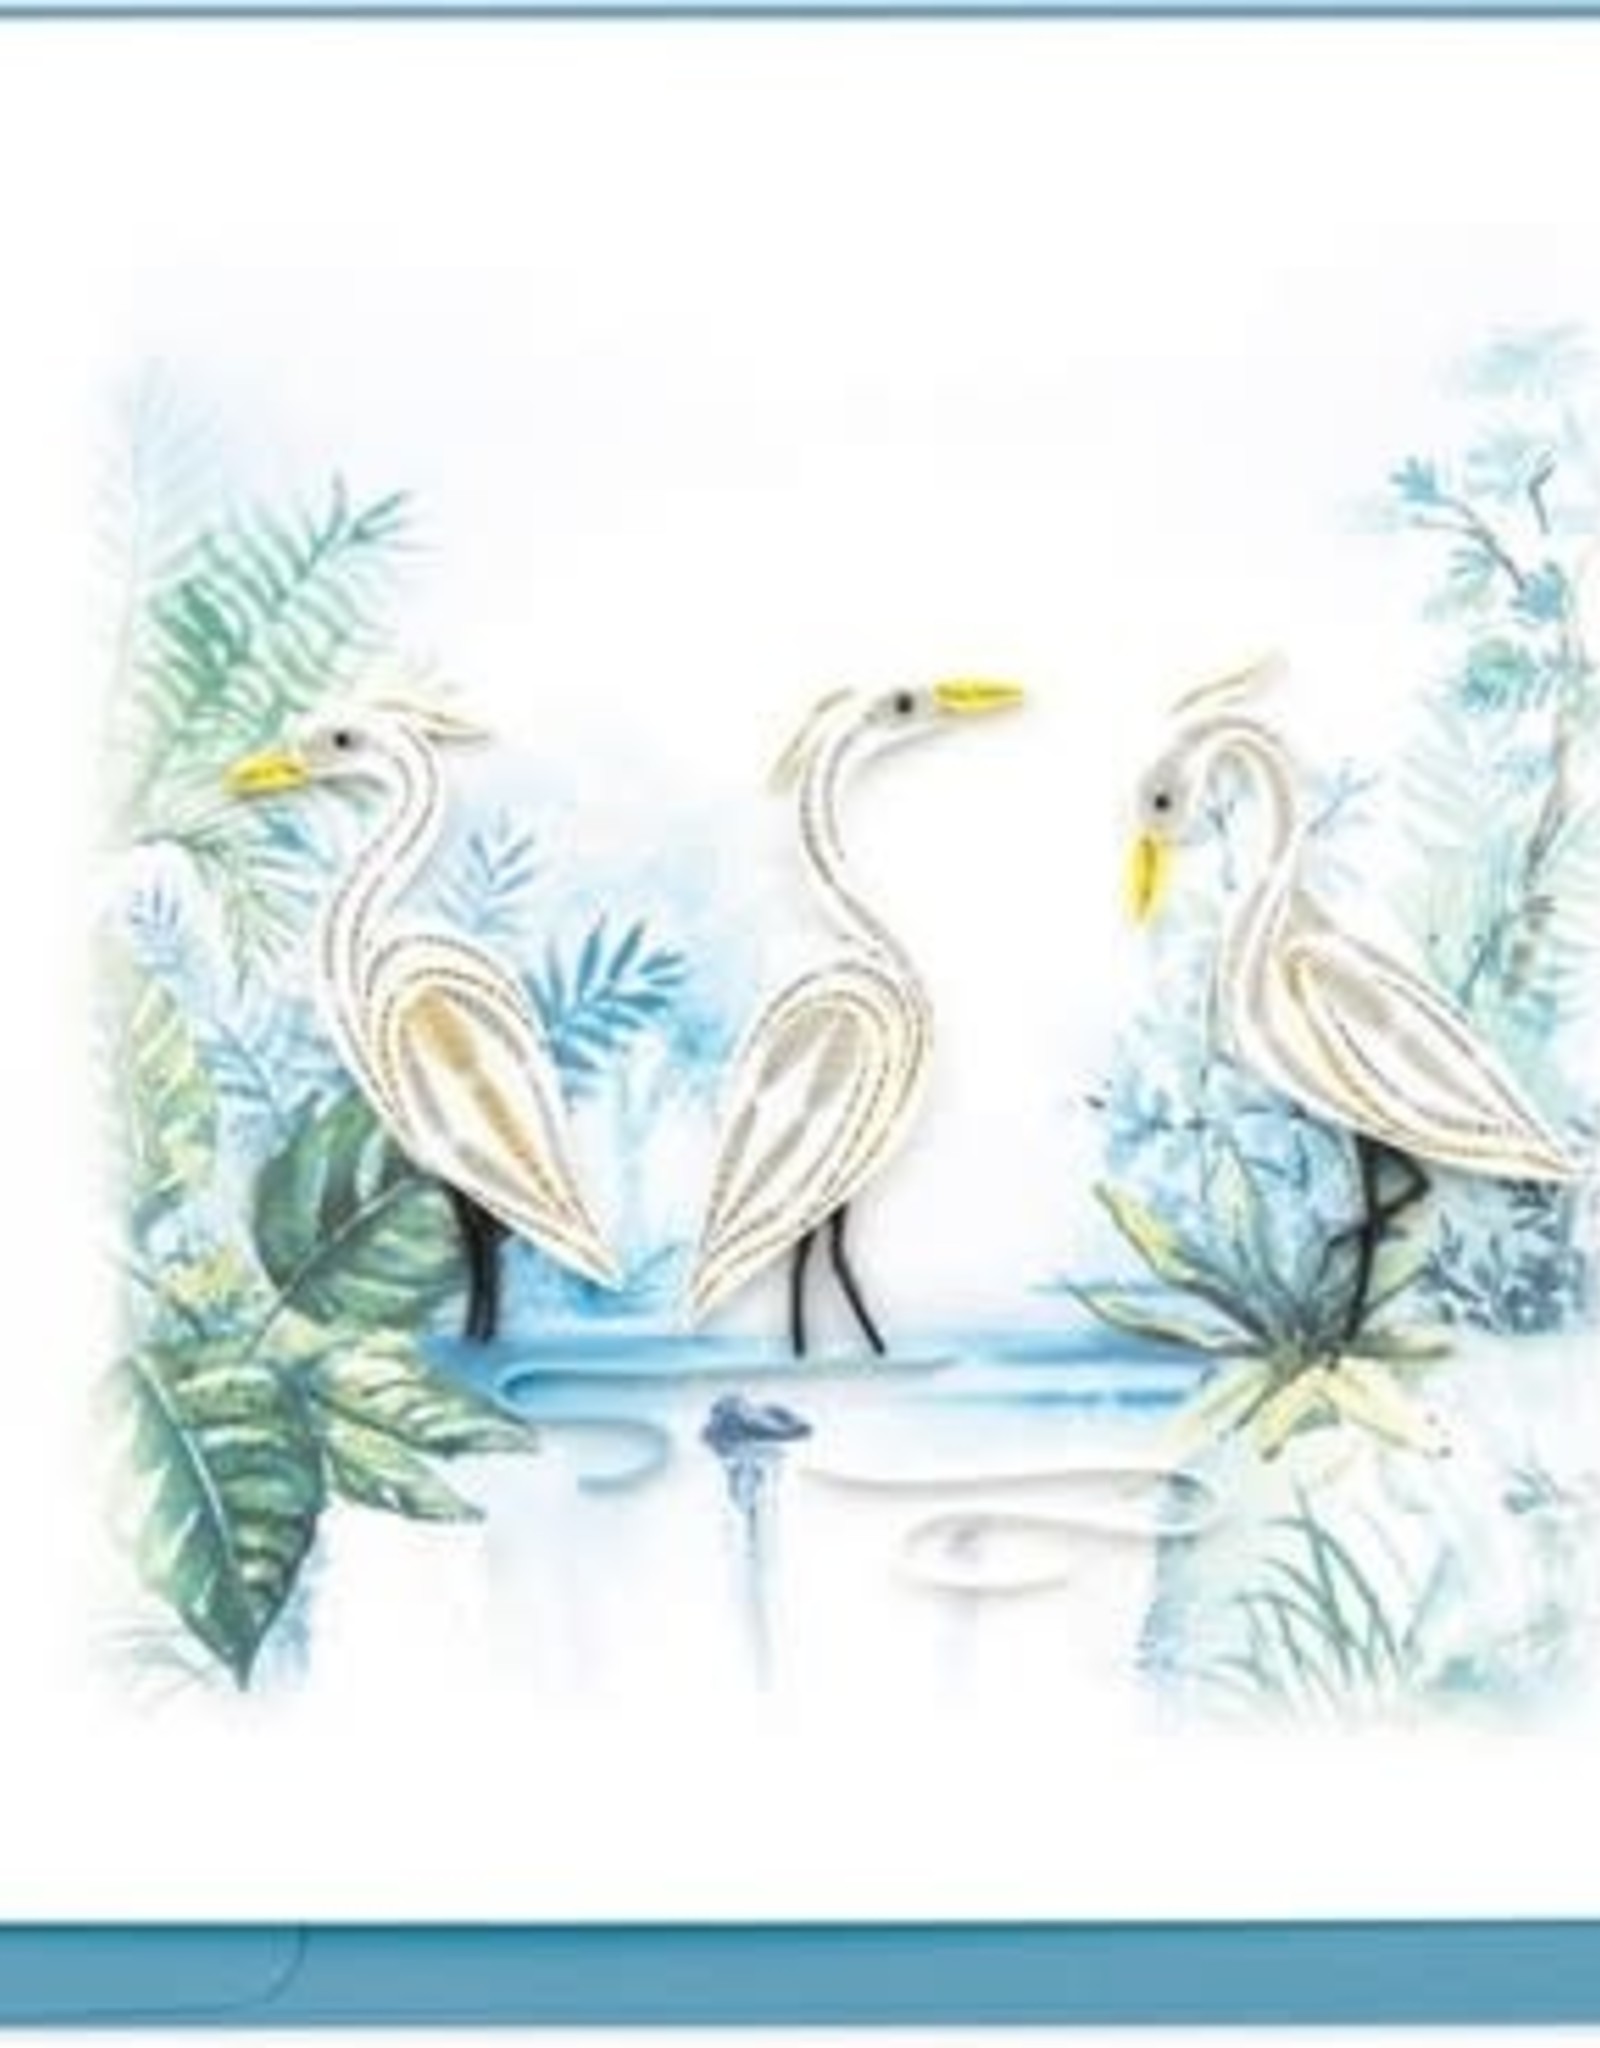 Quilling Card Quilled Three Herons Greeting Card